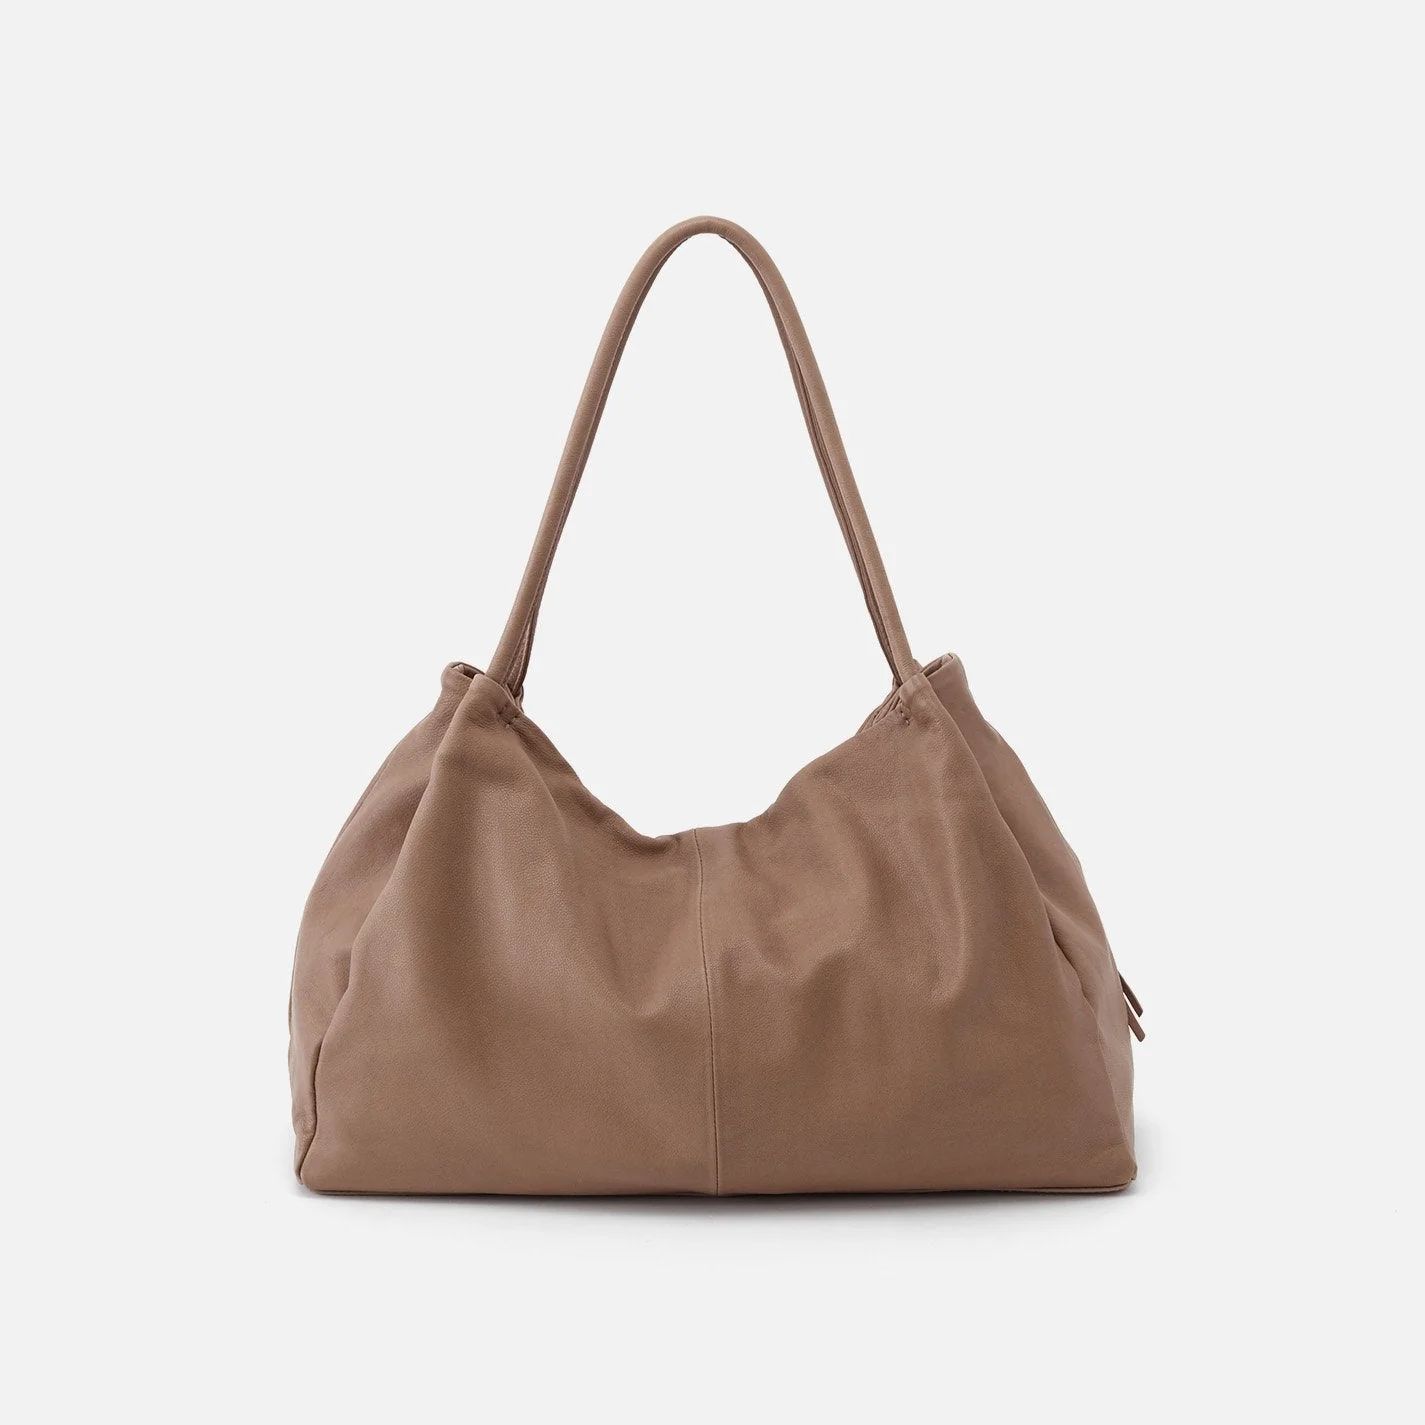 Prima Tote in Soft Leather - Taupe | HOBO Bags